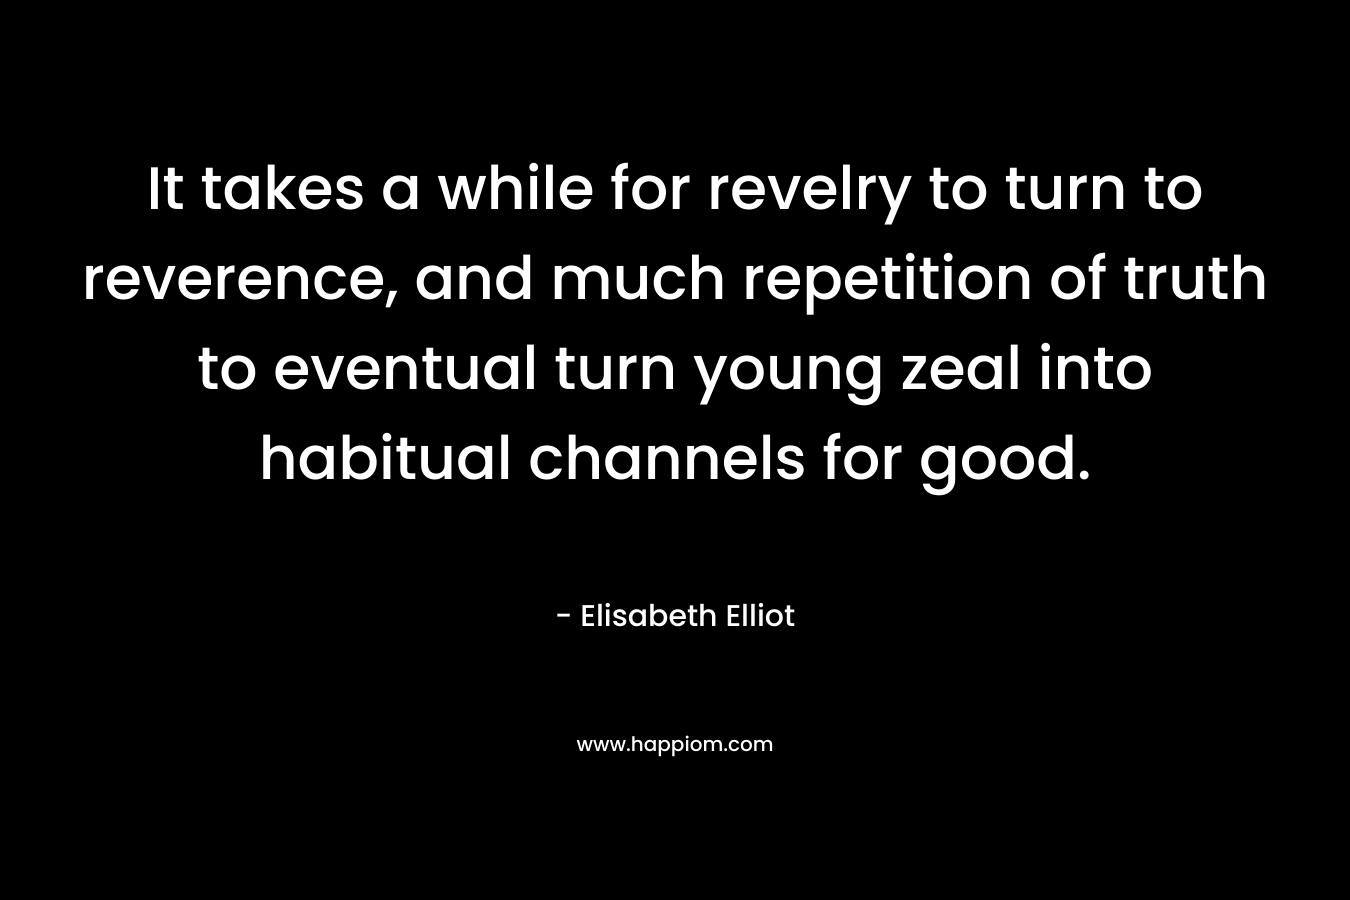 It takes a while for revelry to turn to reverence, and much repetition of truth to eventual turn young zeal into habitual channels for good.